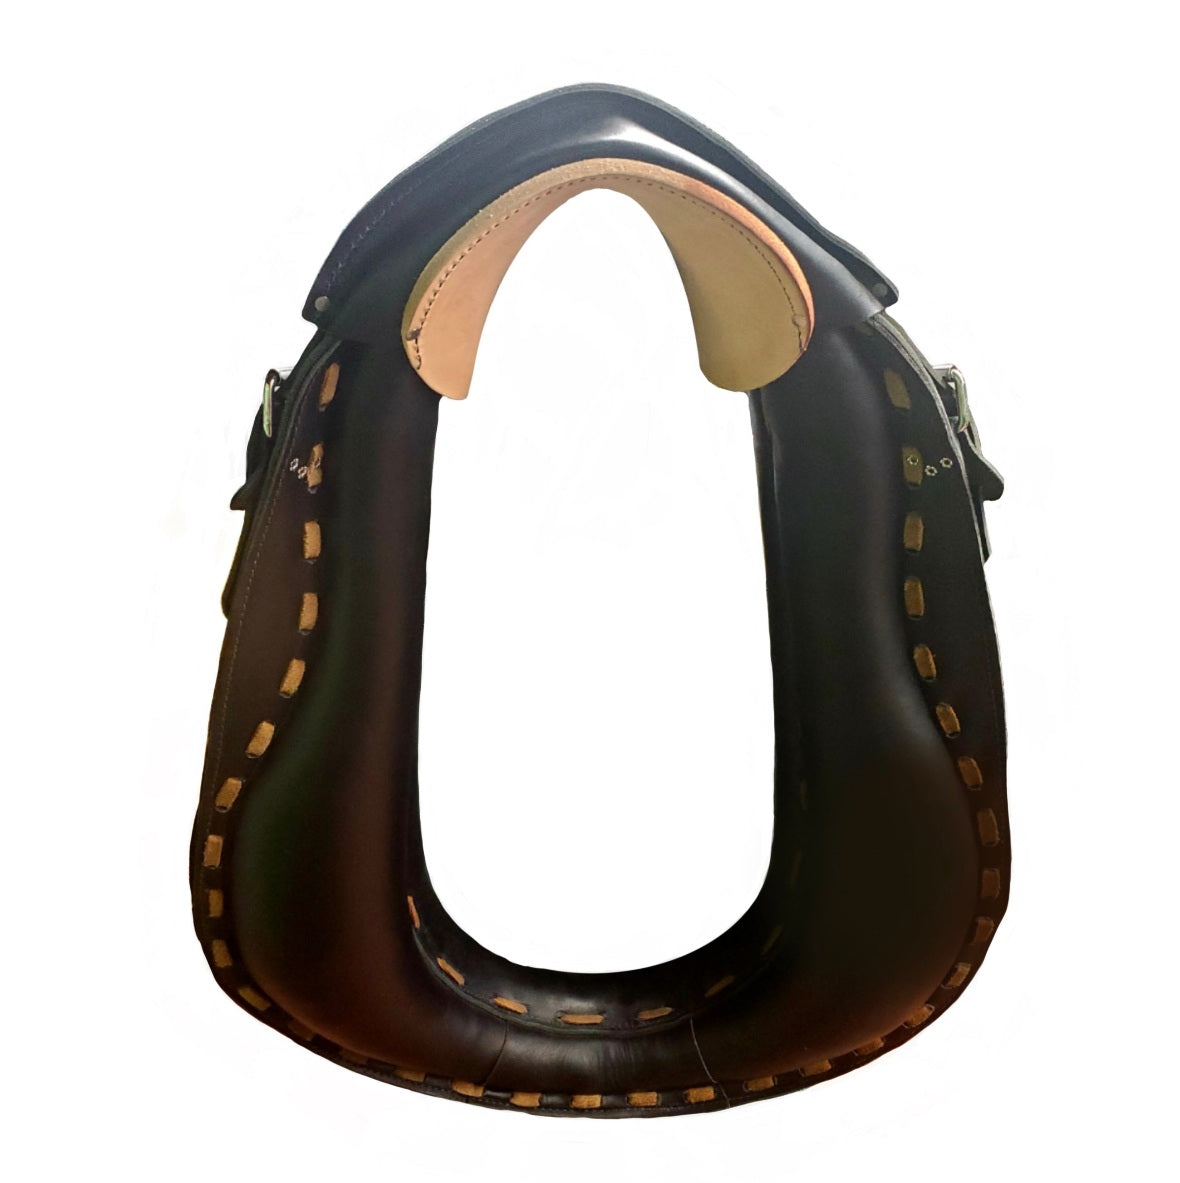 Ensure your horse (from Miniature and Cob to Draft) can pull to their full potential  - with a high-quality, adjustable Horse Collar. This Collar allows your hose to work and drive comfortably